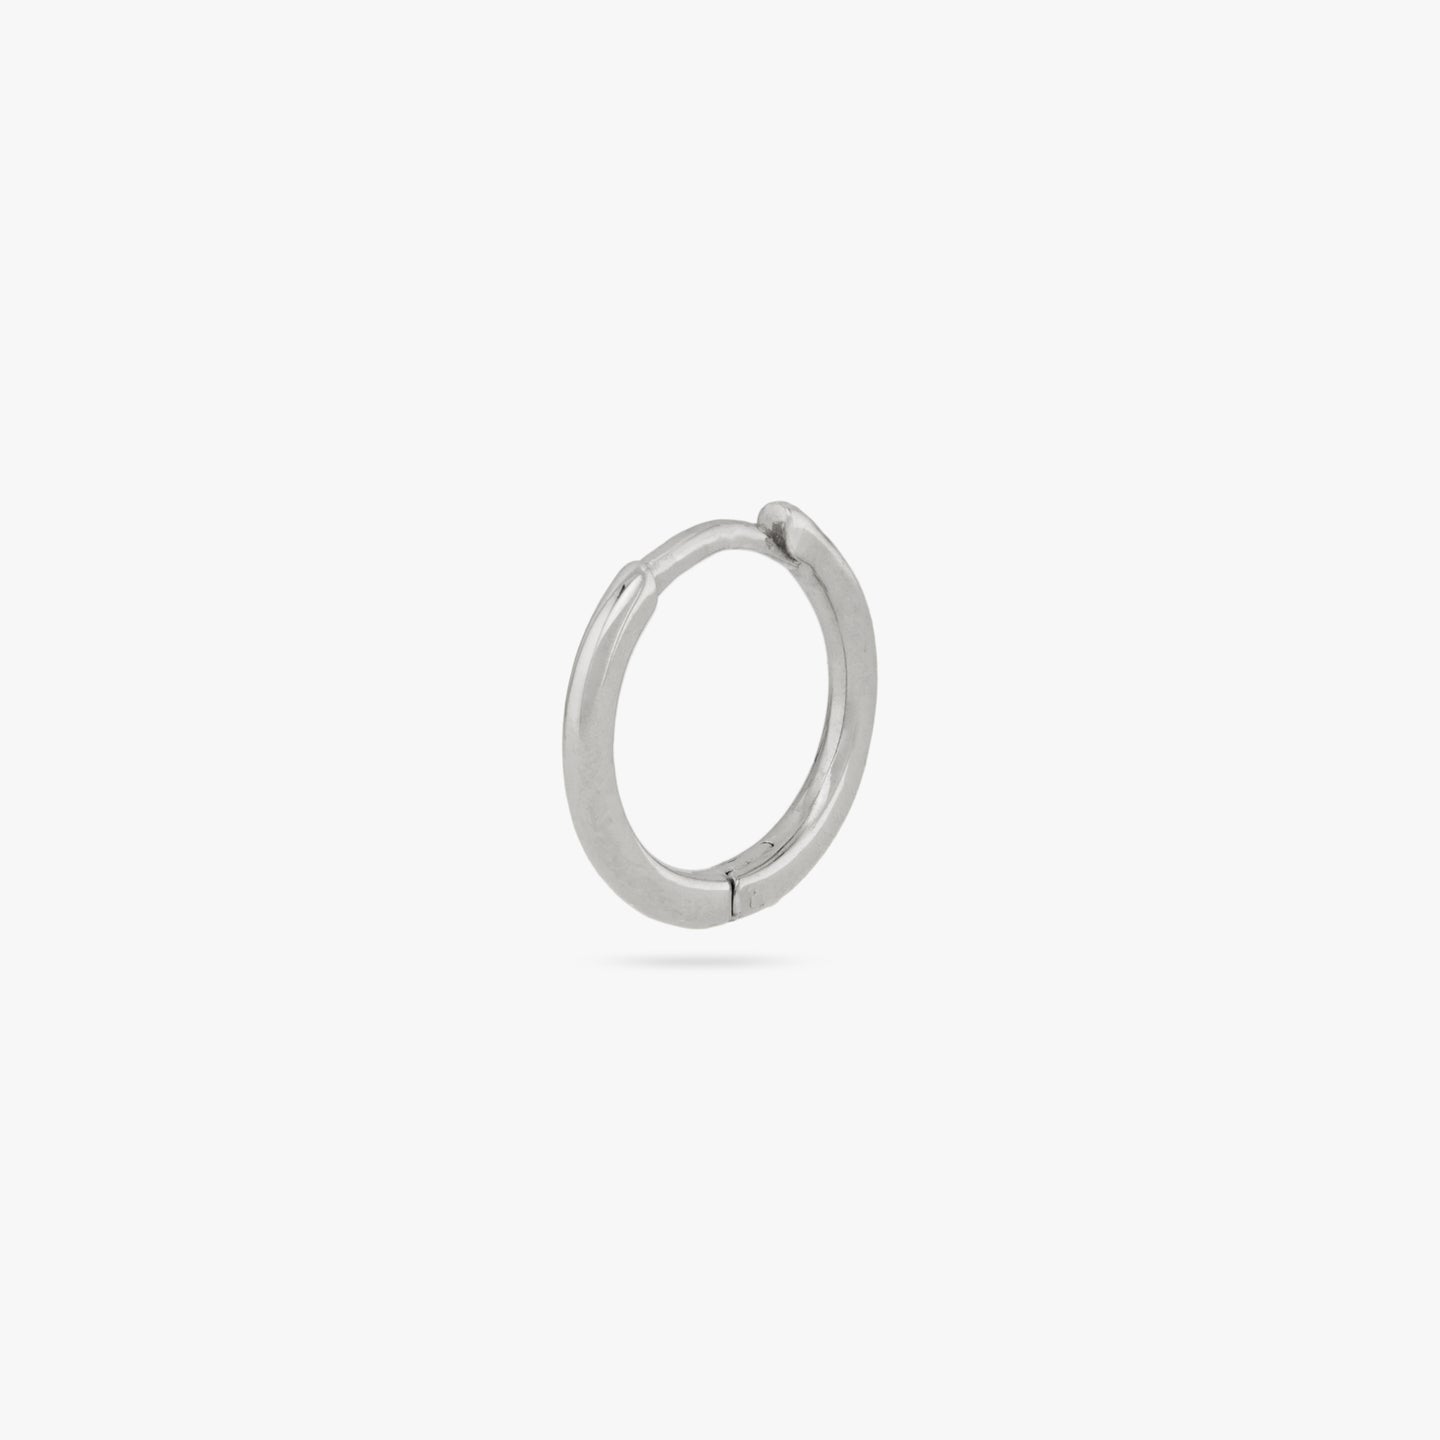 This is a small silver huggie with square edges color:null|silver